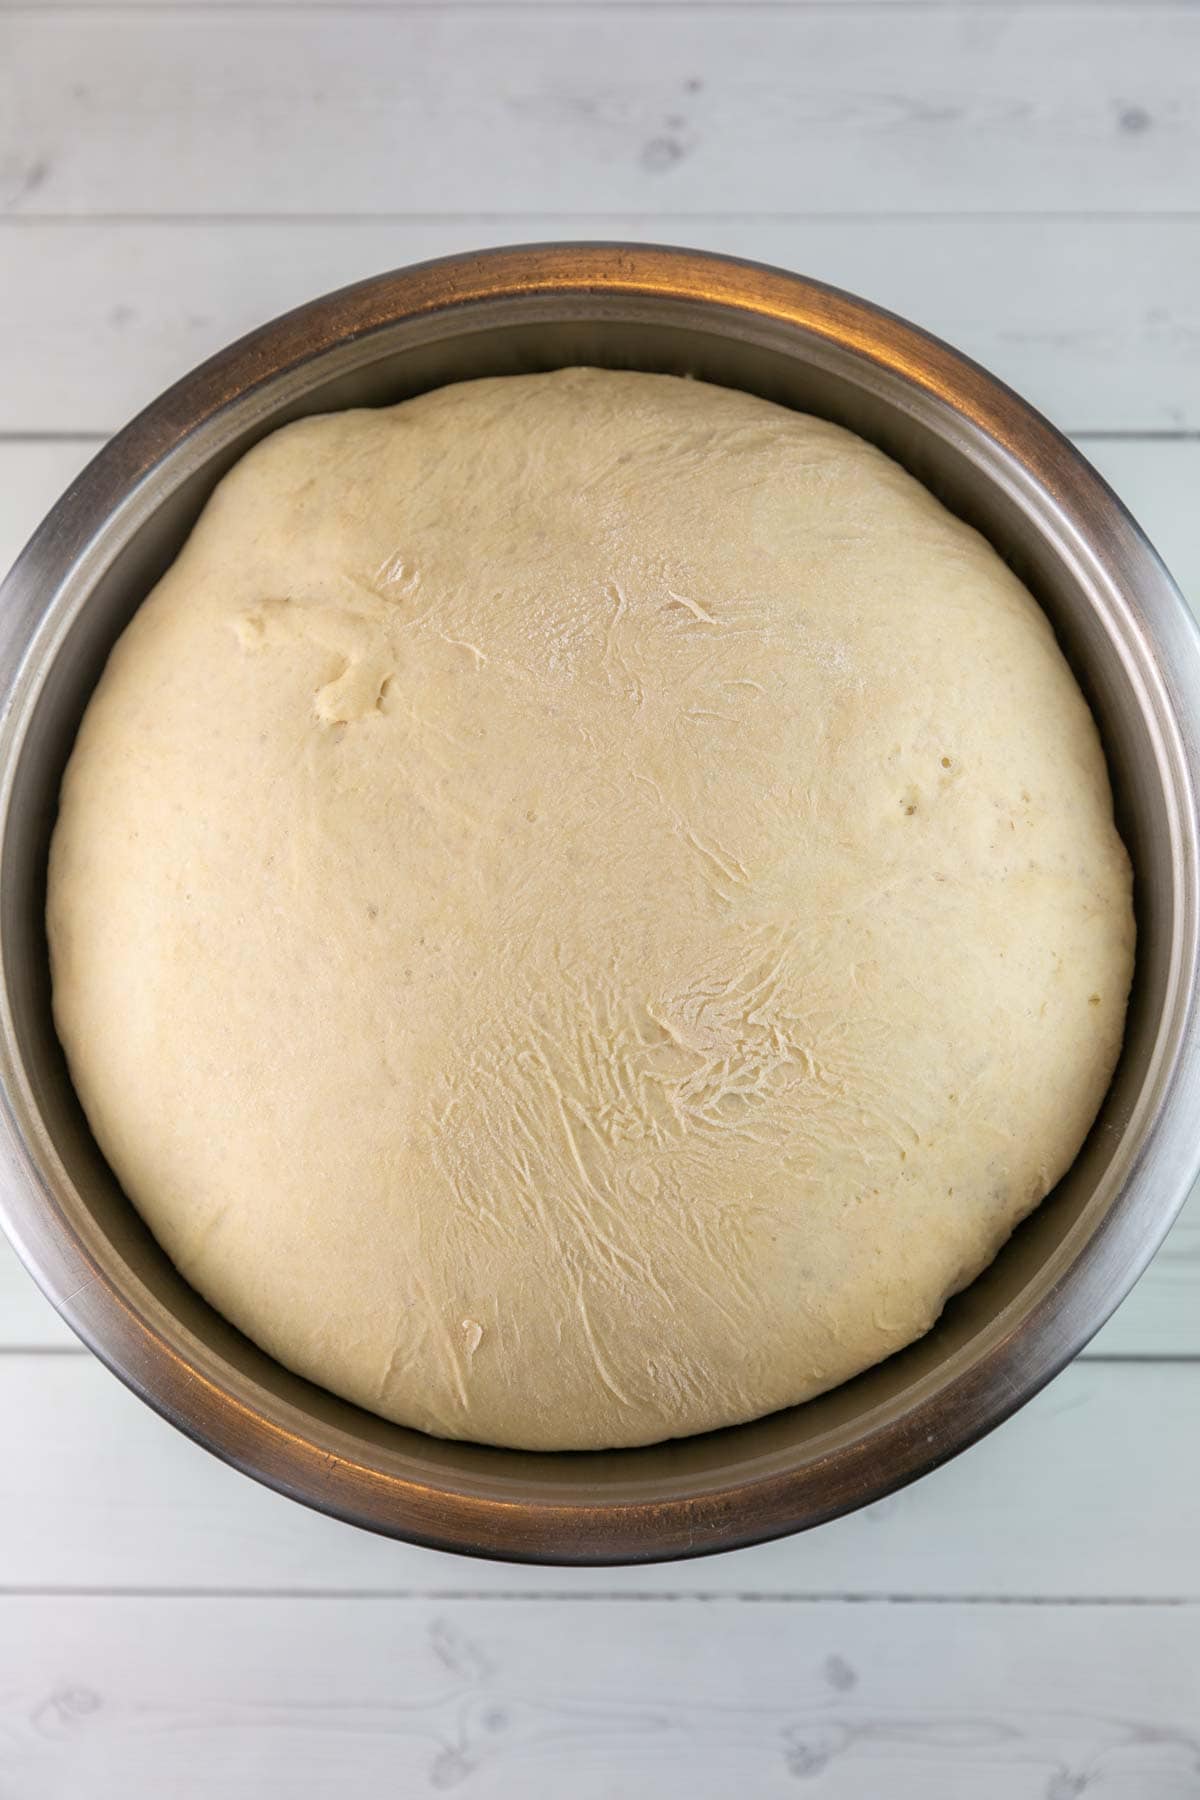 proofed pizza dough in a large metal bowl